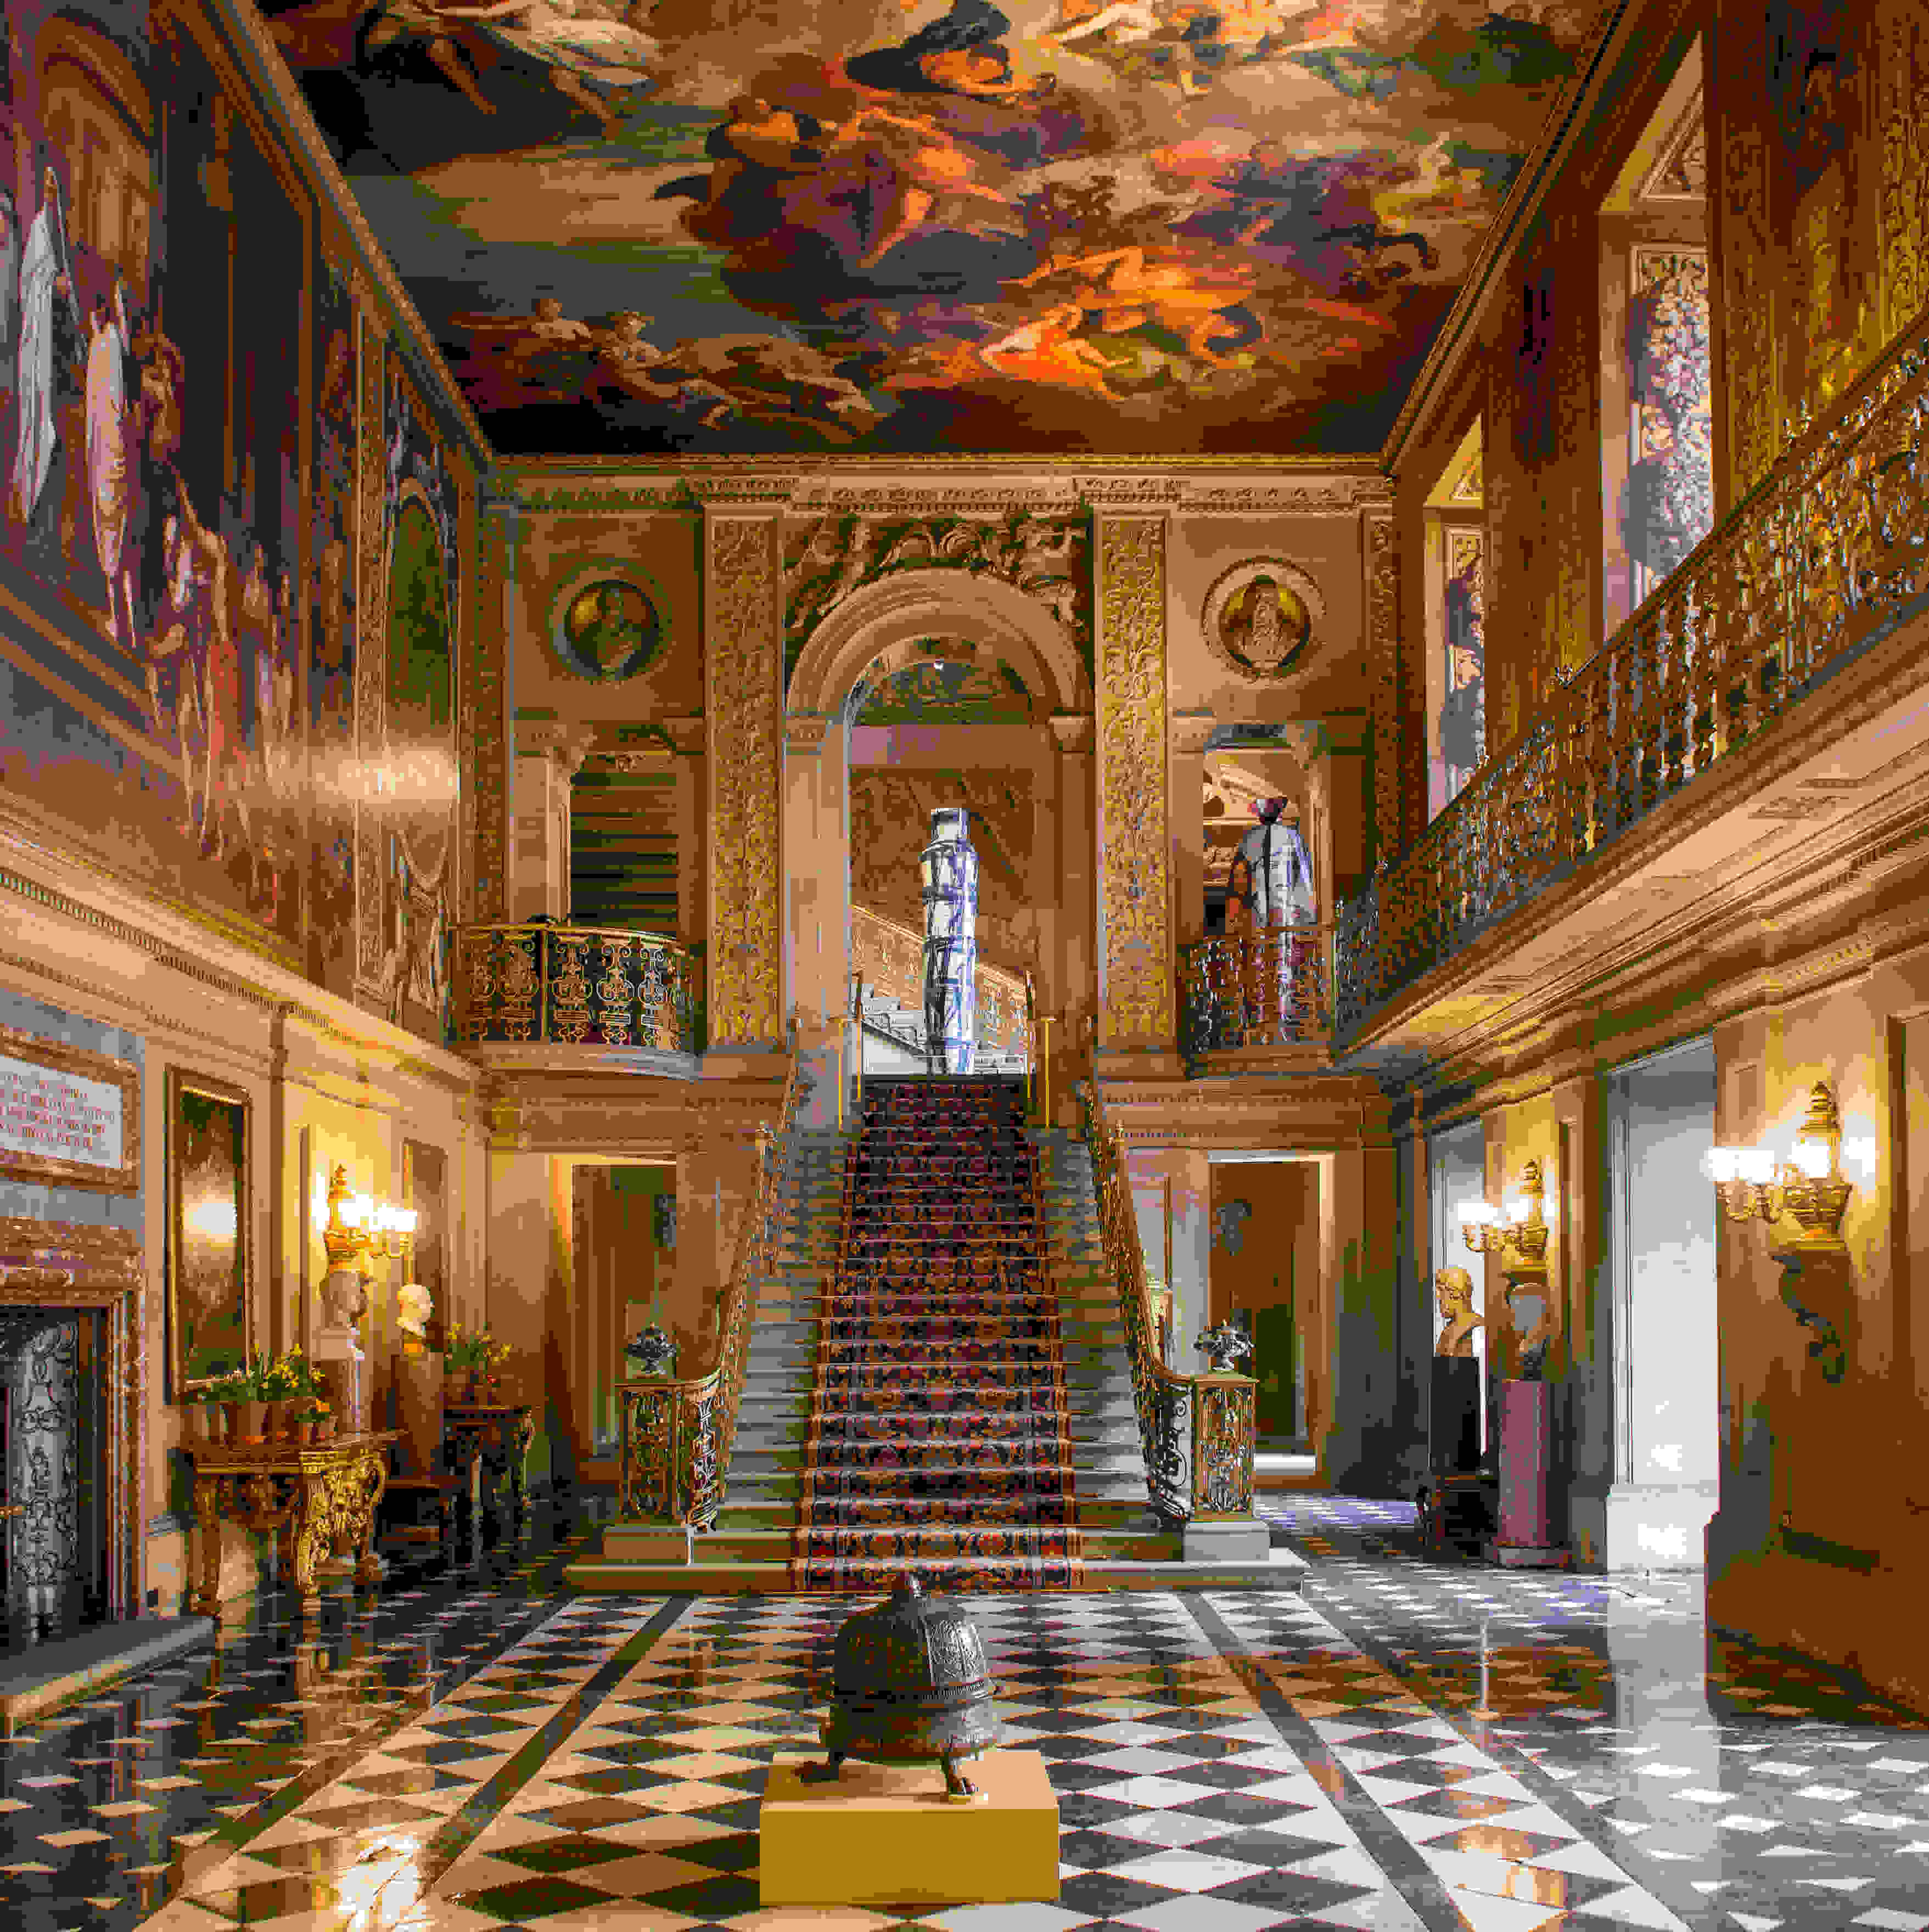 The Painted Hall at Chatsworth (credit Chatsworth House Trust)